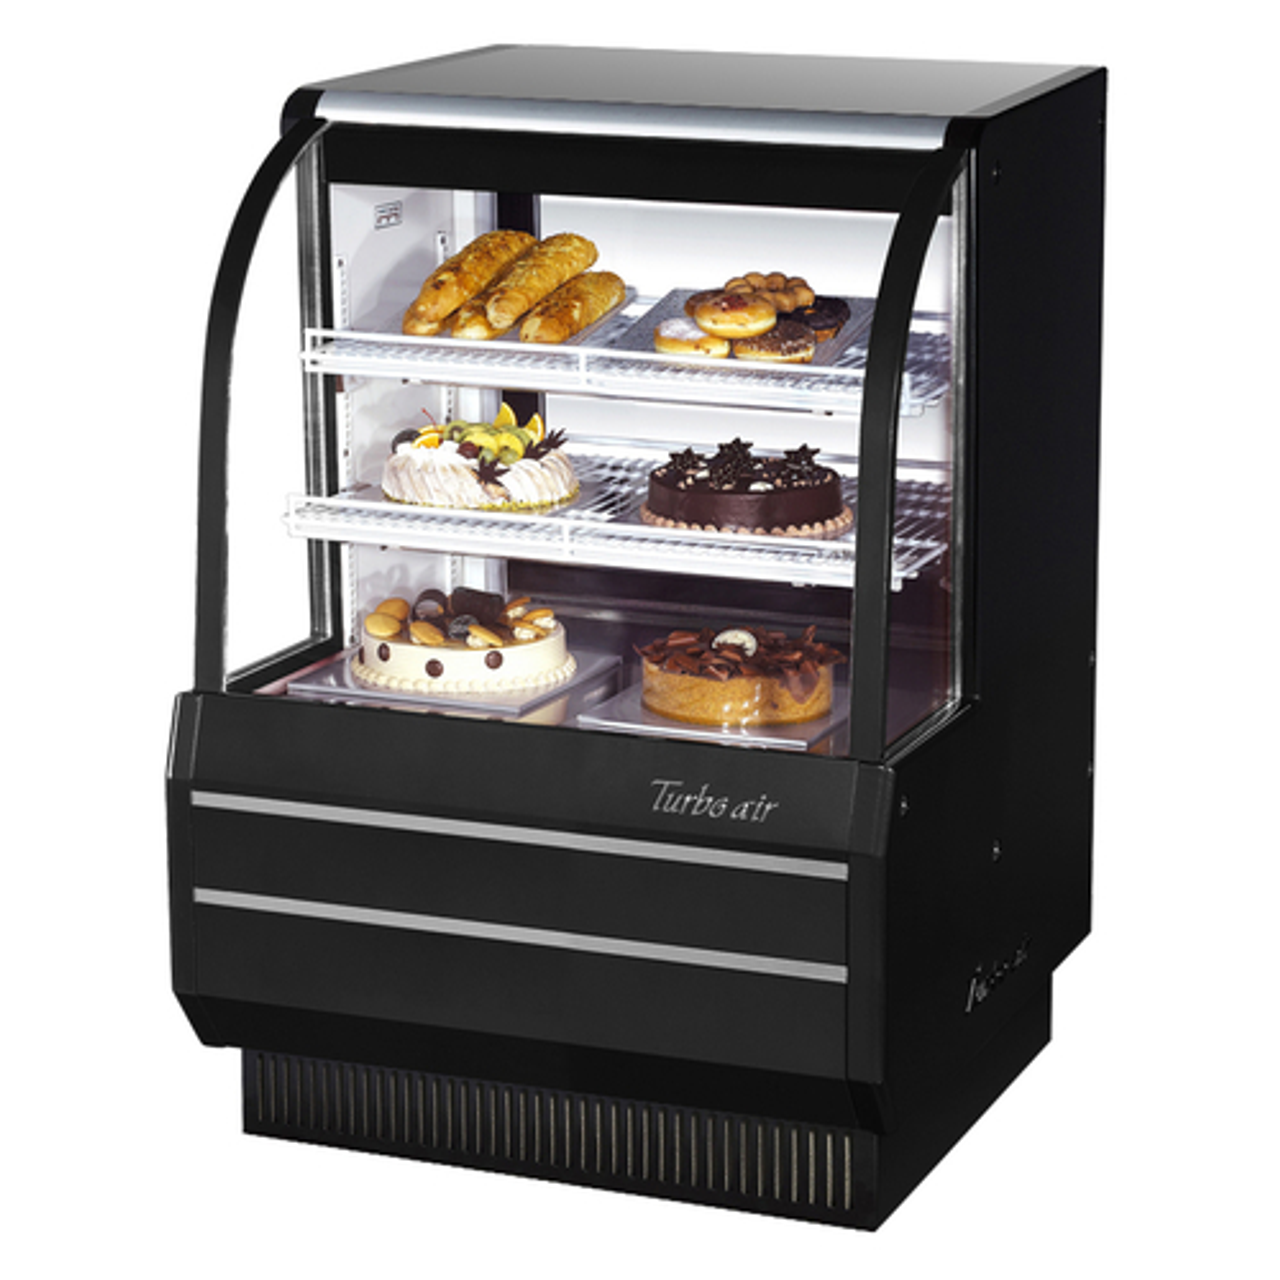 Turbo Air TCGB-36-W(B)-N 36" Refrigerated Bakery Display Case, Curved Glass- Display Case Series